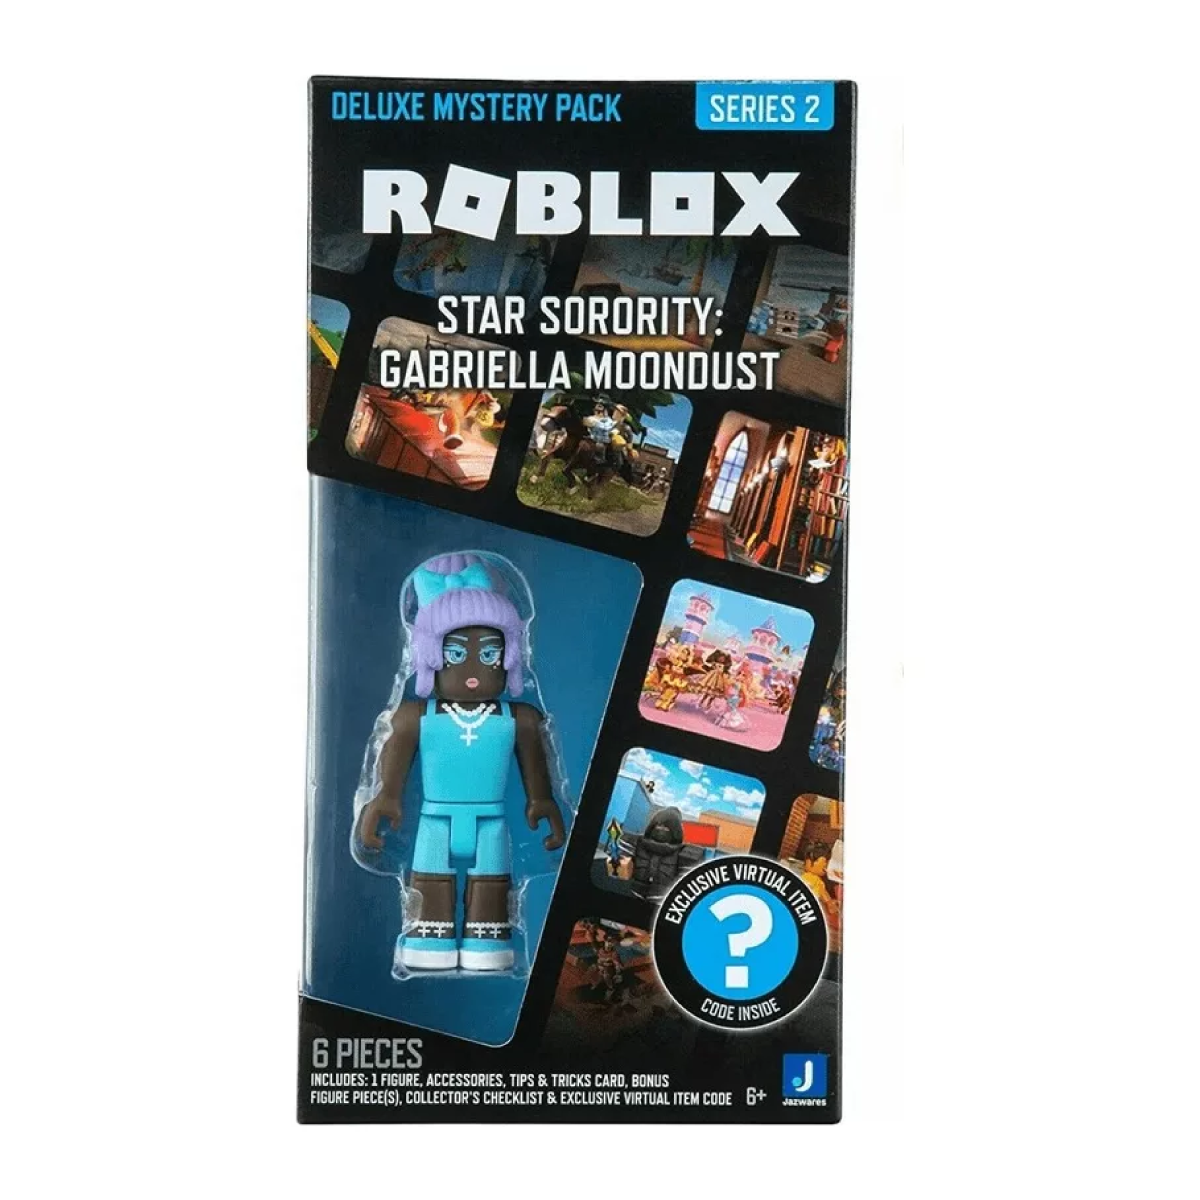 Roblox Deluxe Mistery Pack Serie 2